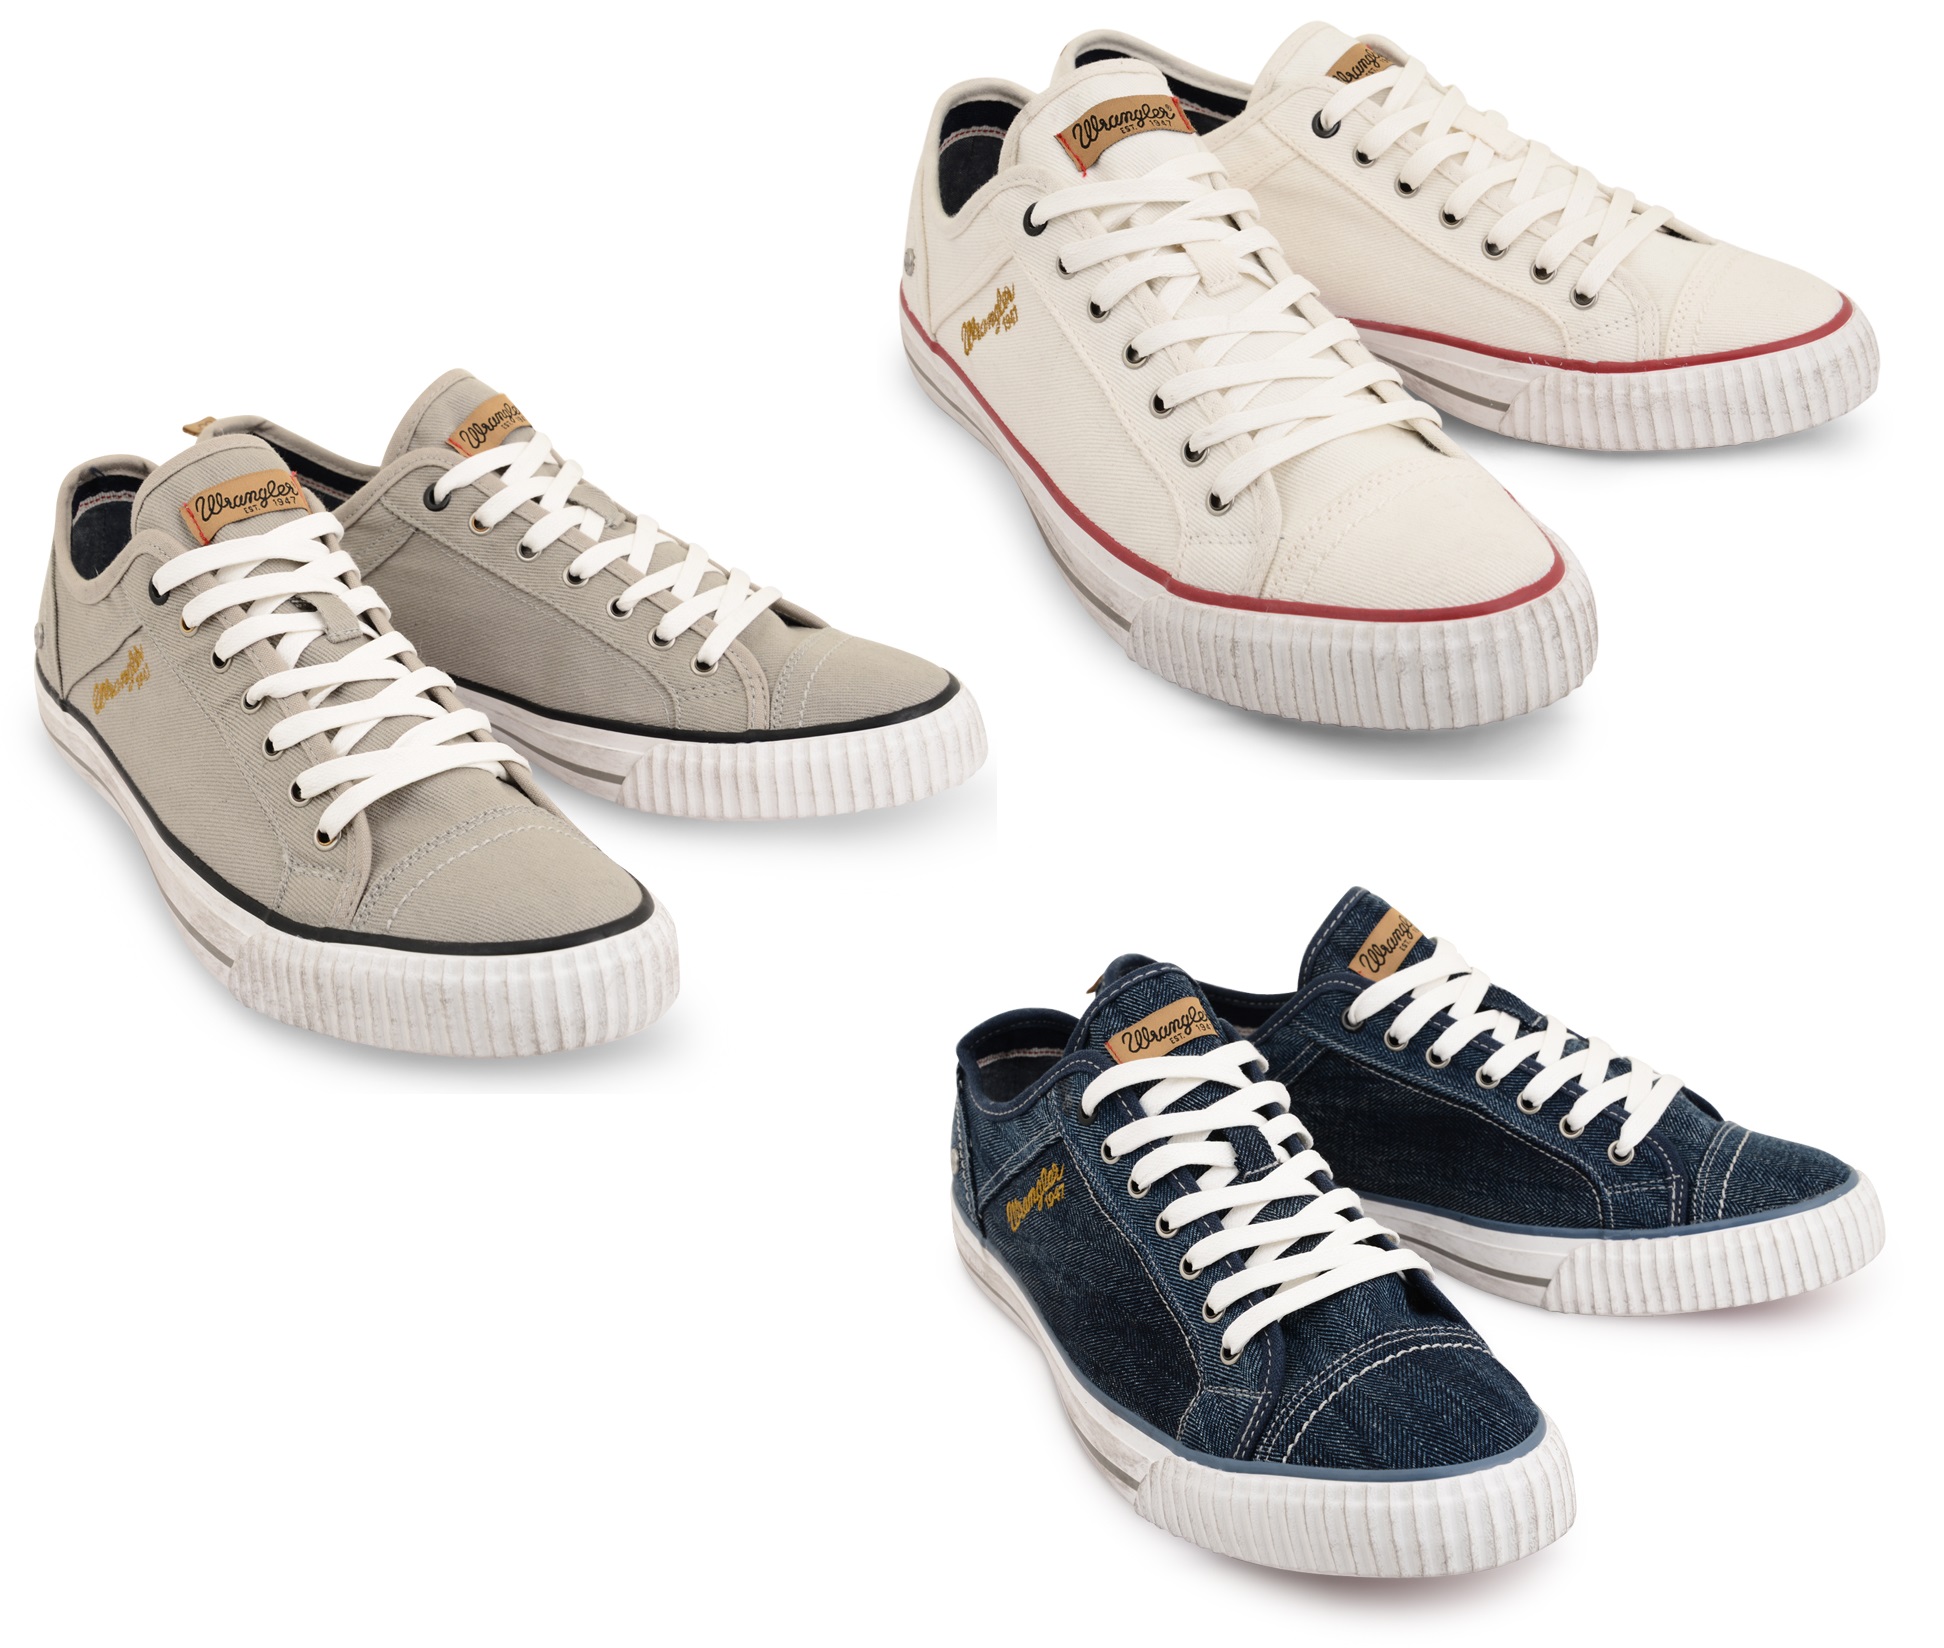 Wrangler Starry Low Canvas Shoes 